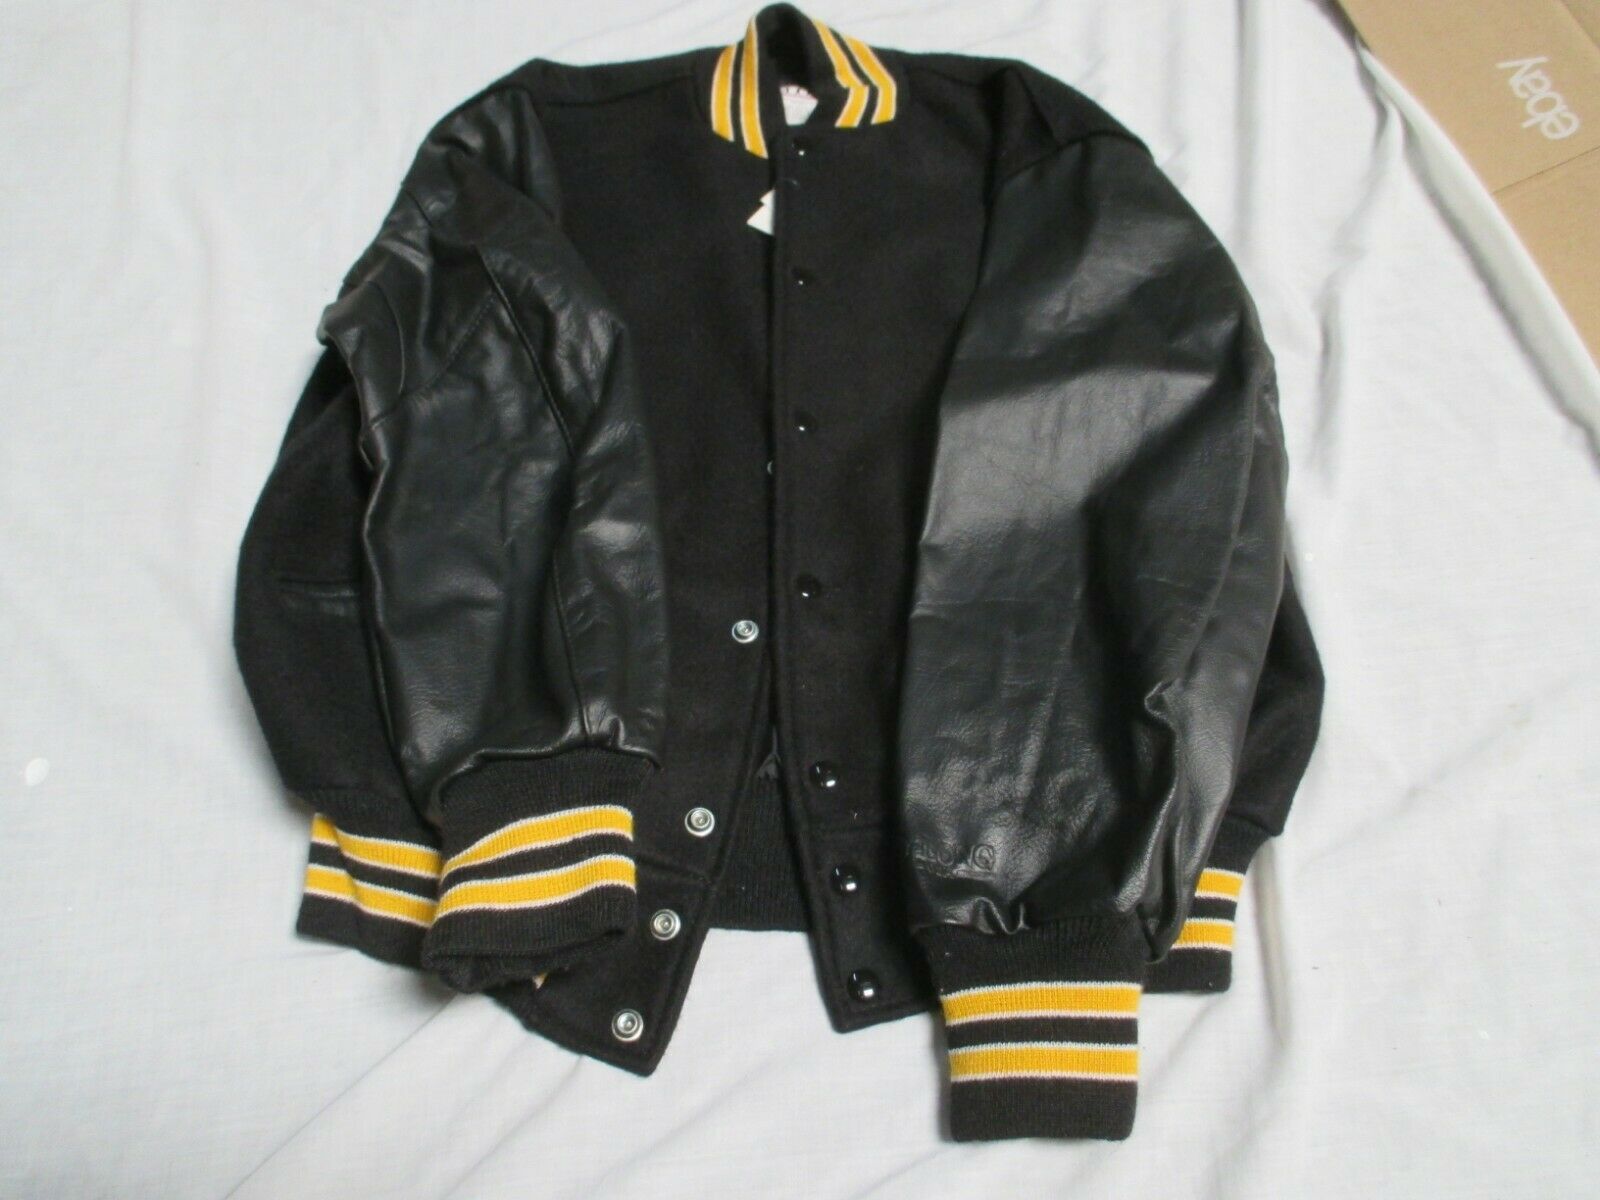 DELONG ADULT BLK BODY & SLEEVES 2 GLD  STRIPES OUTLINE IN WHT QUILT LINED JACKET